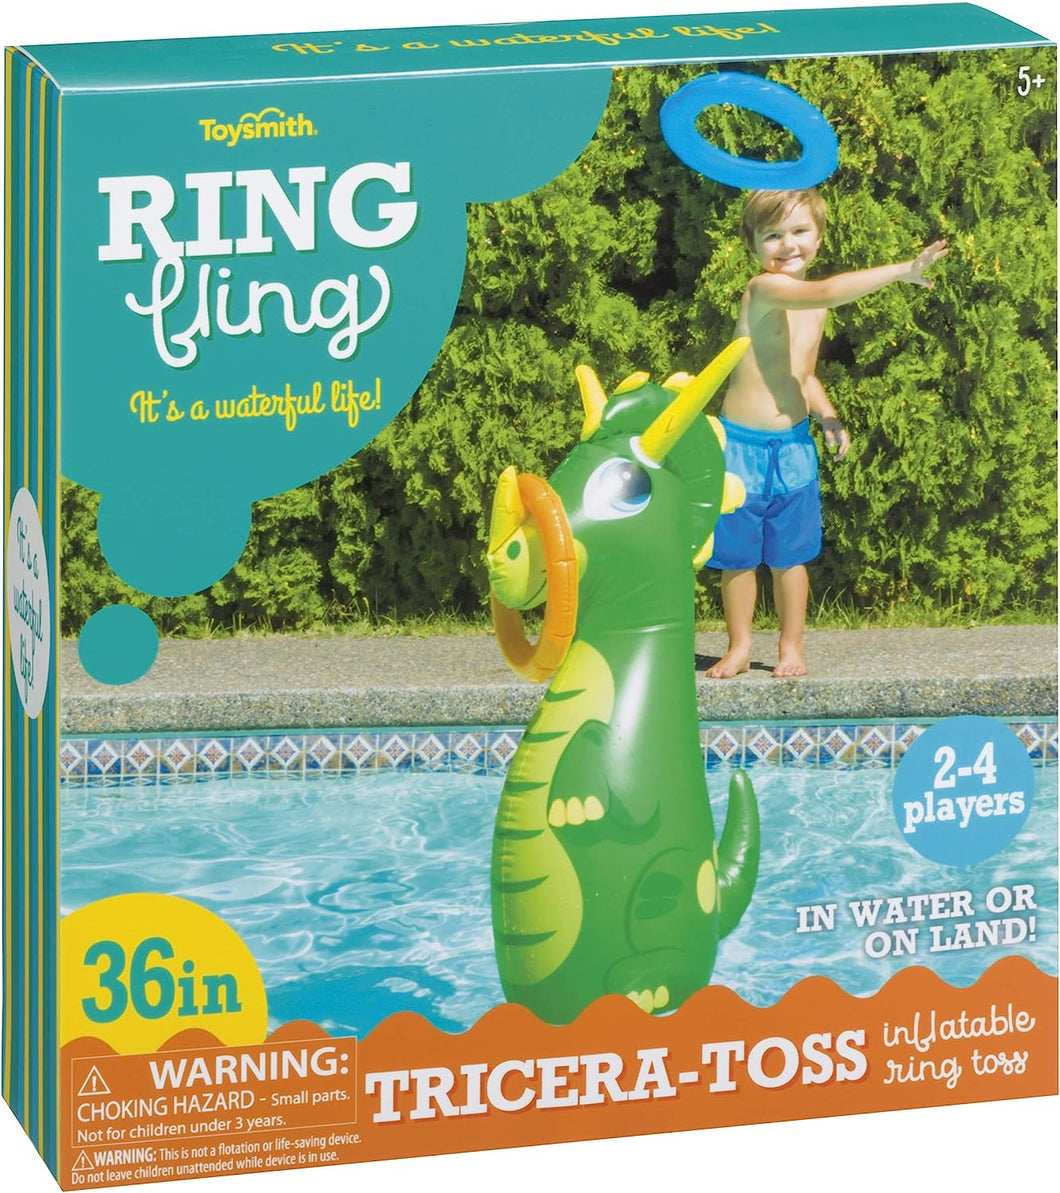 Tricera-Toss Inflatable Pool Ring